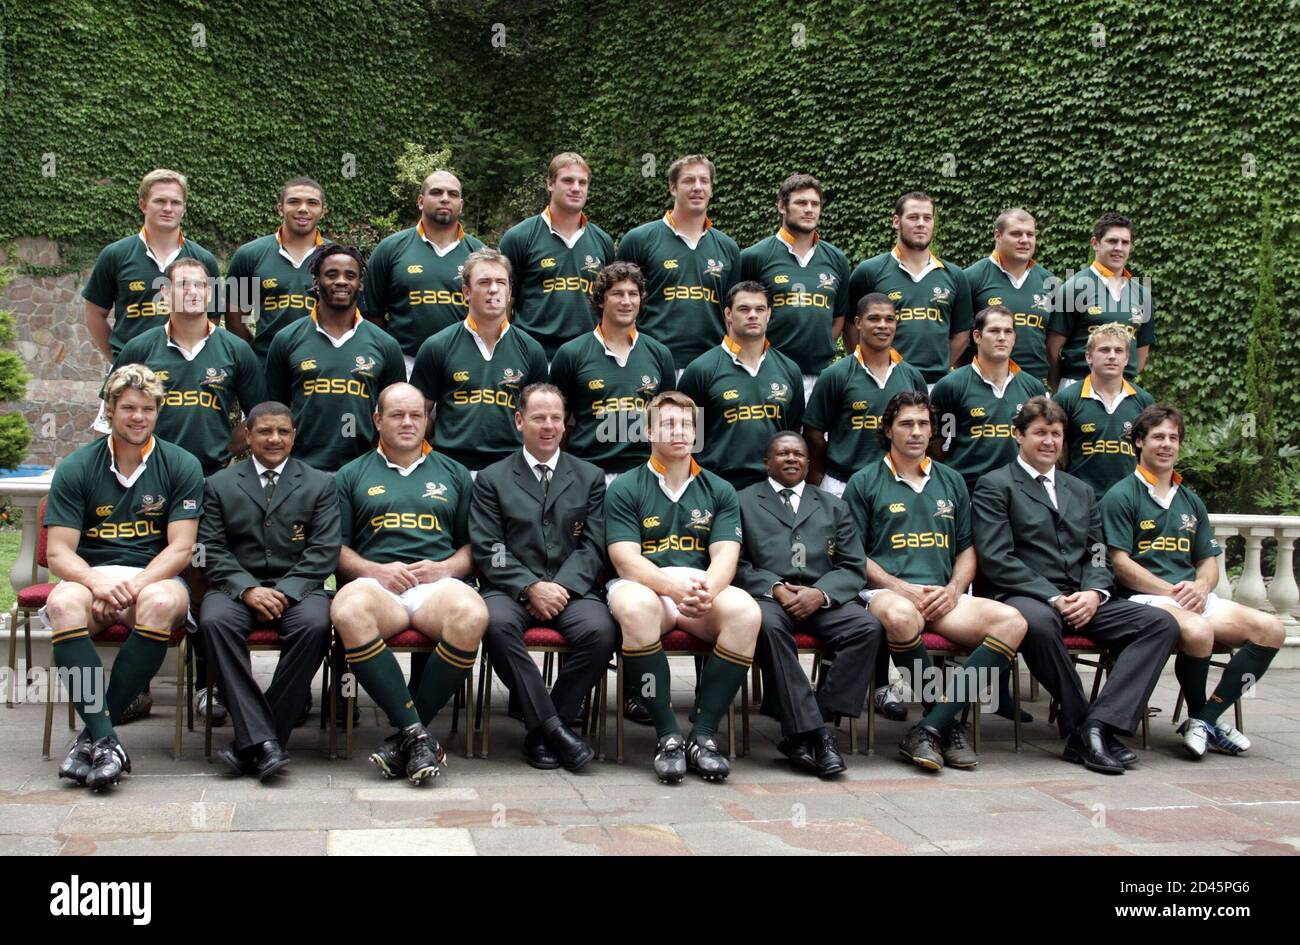 Recurso Psicológico acero South Africa's rugby team Springboks pose in the garden of the hotel where  they are staying in Buenos Aires, December 3, 2004. The Springboks faces  Argentina's Los Pumas in a test match